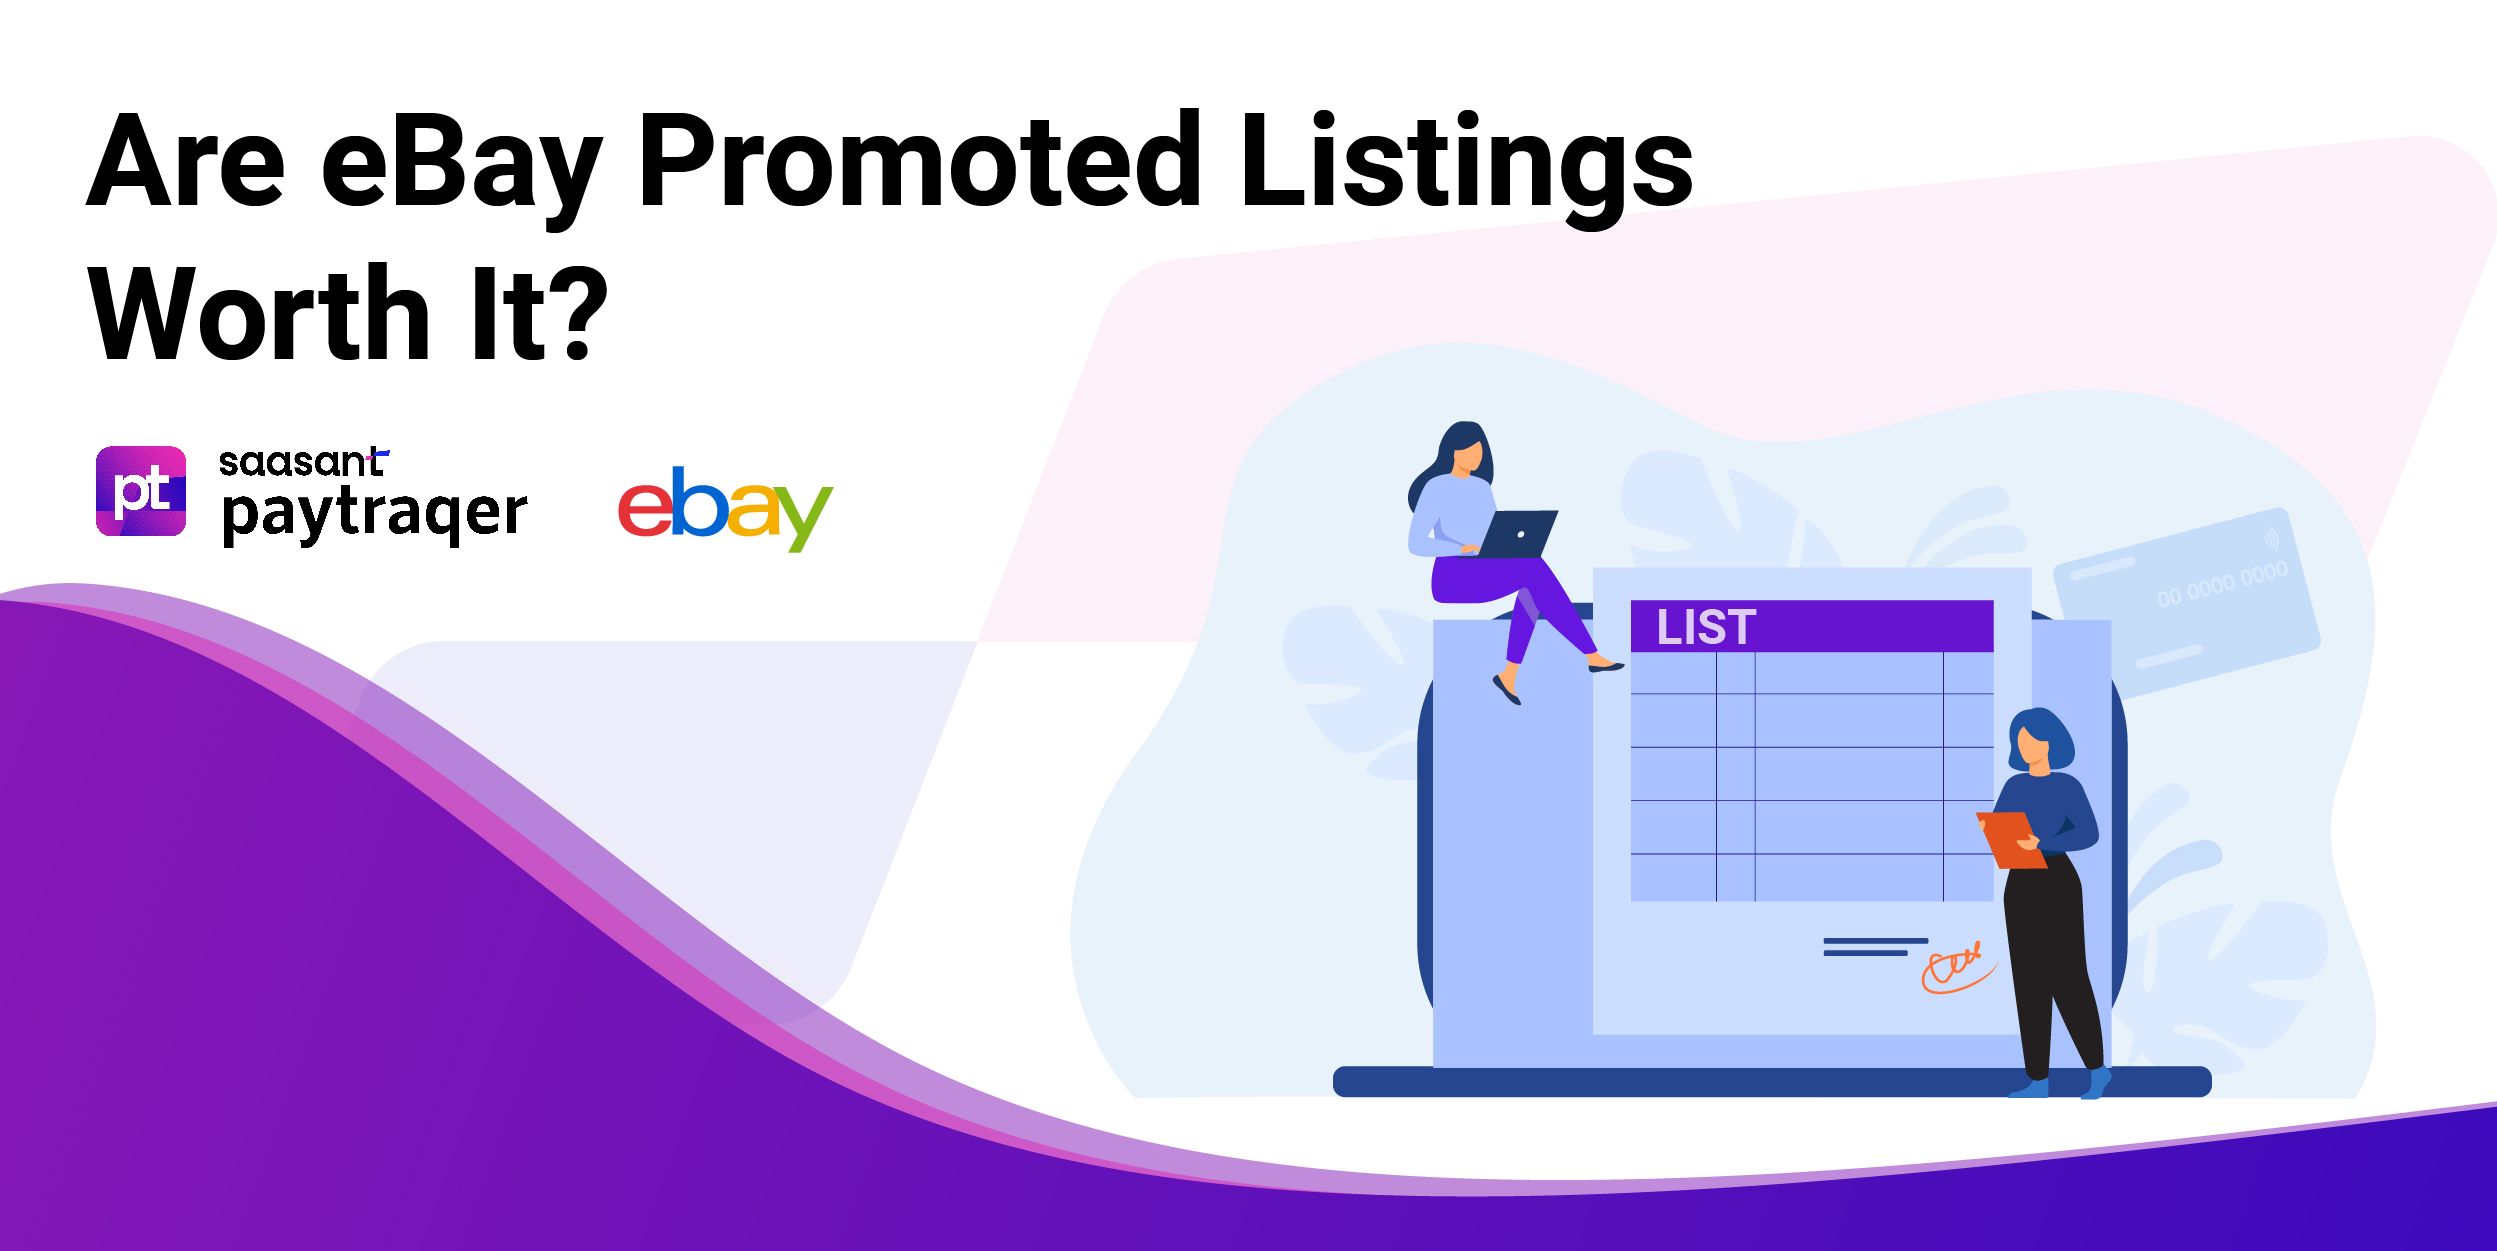 Are eBay Promoted Listings Worth It?